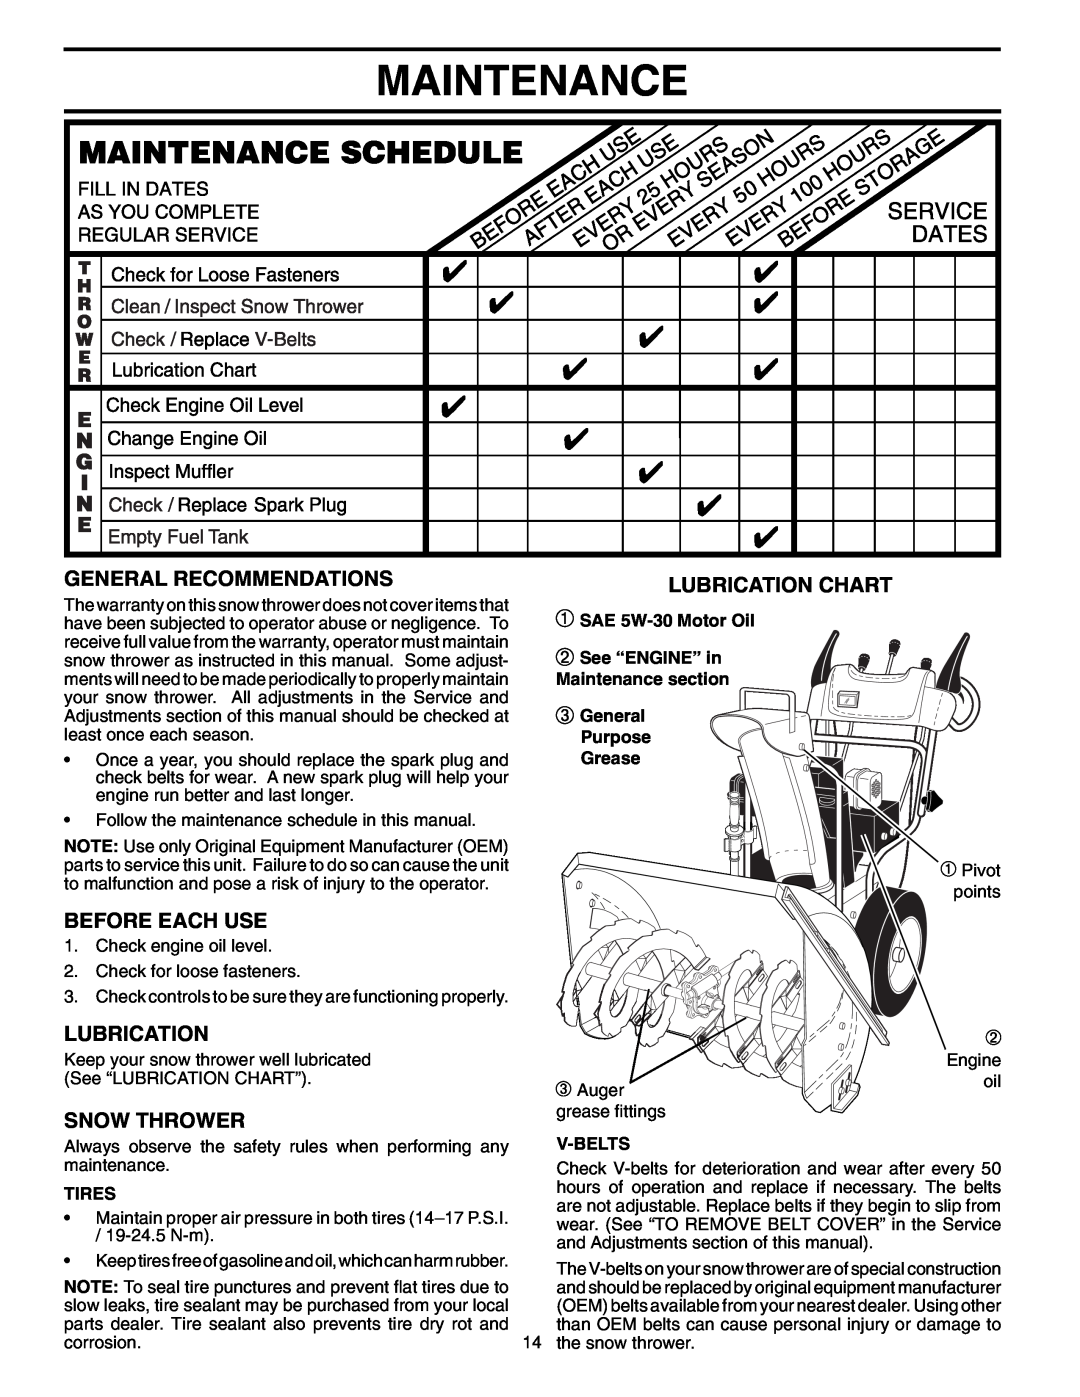 Poulan 96192001400 Maintenance, General Recommendations, Before Each Use, Snow Thrower, Lubrication Chart, Tires 